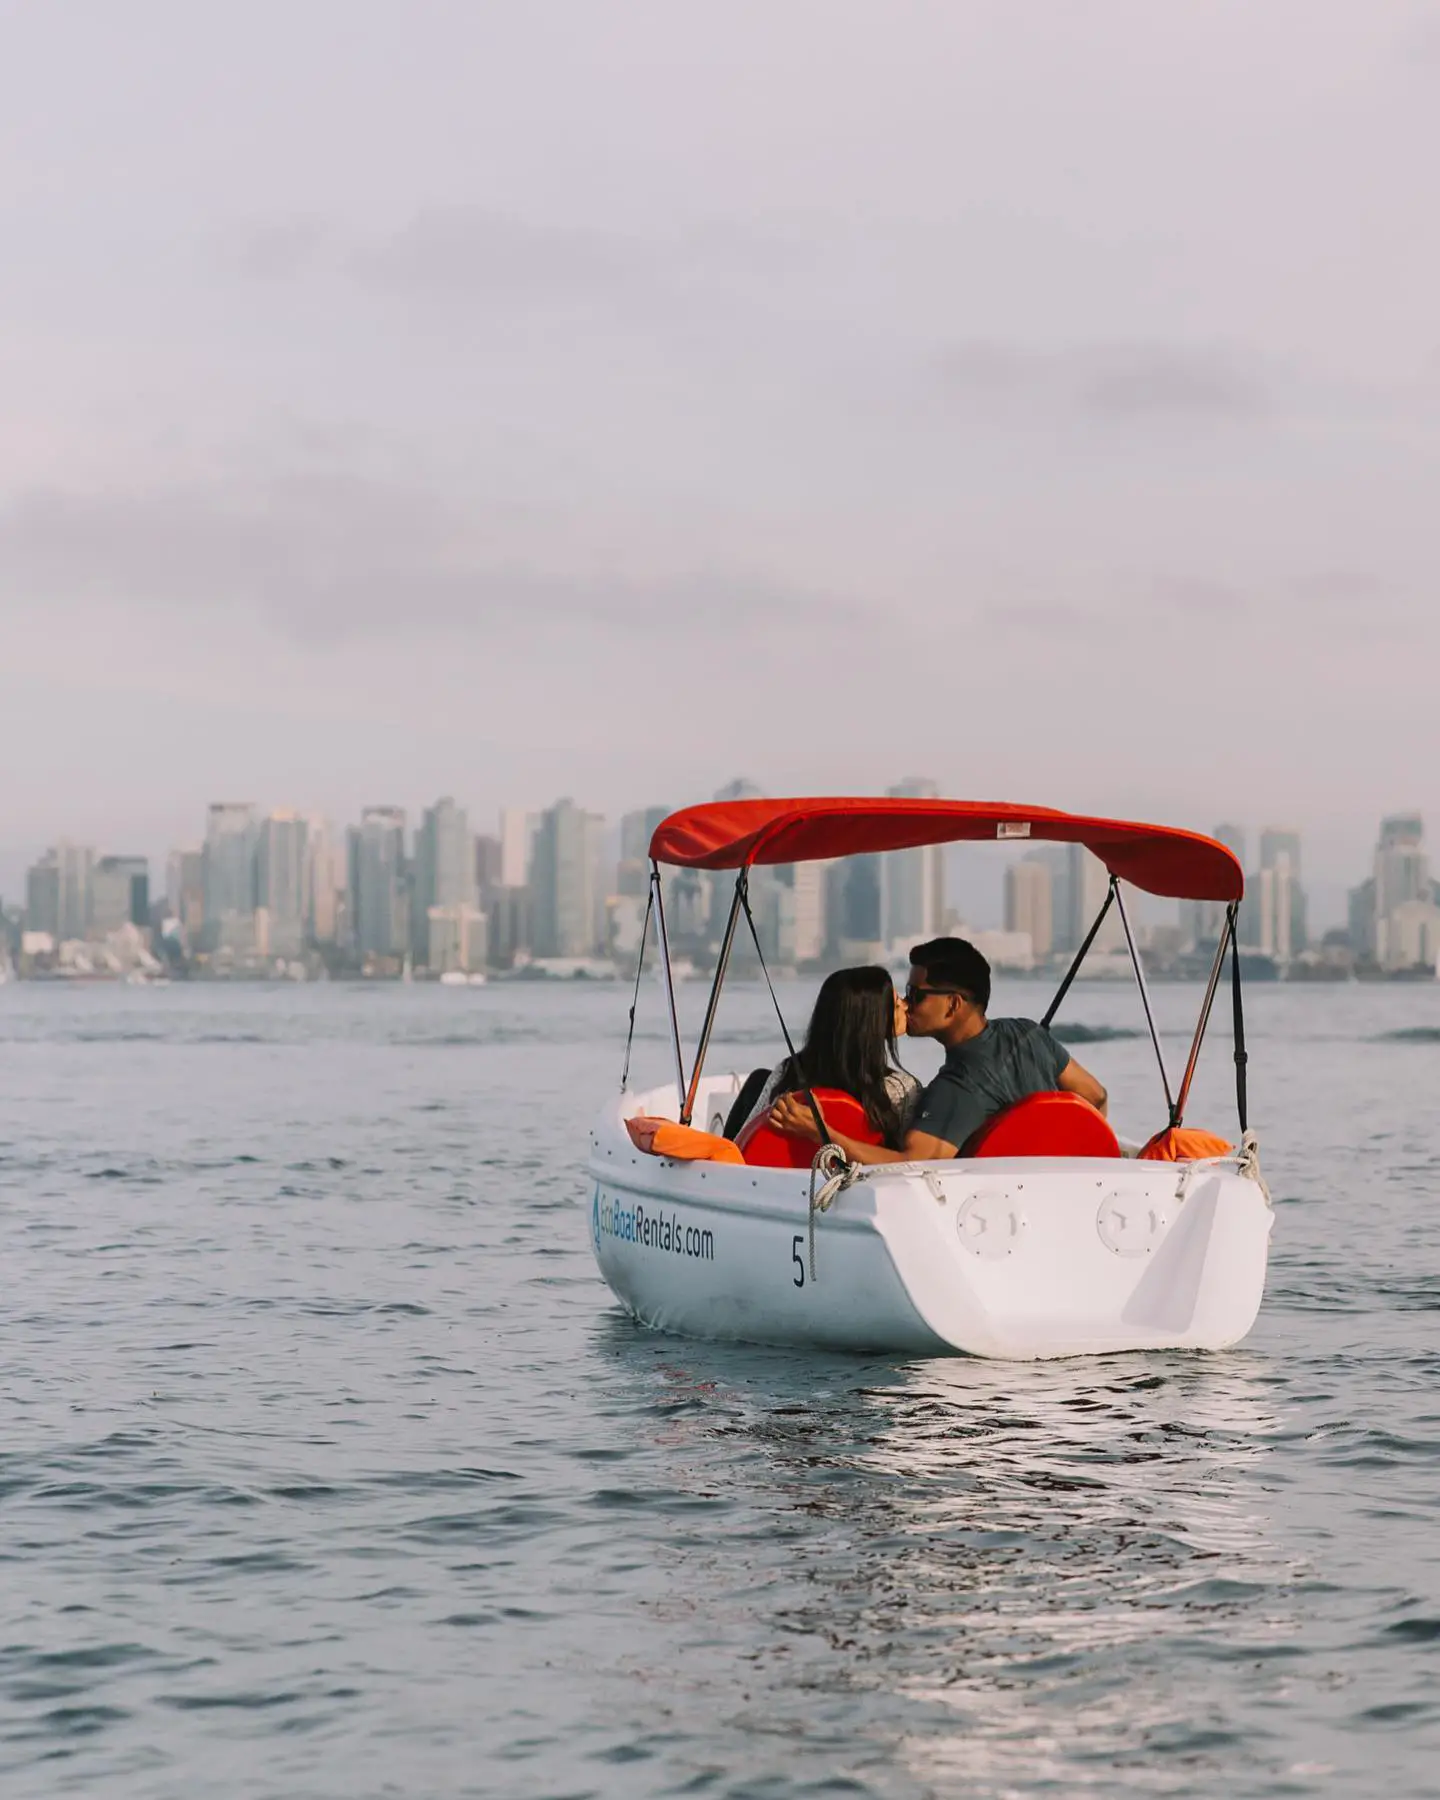 Best Pedal Boat Rentals in San Diego Bay